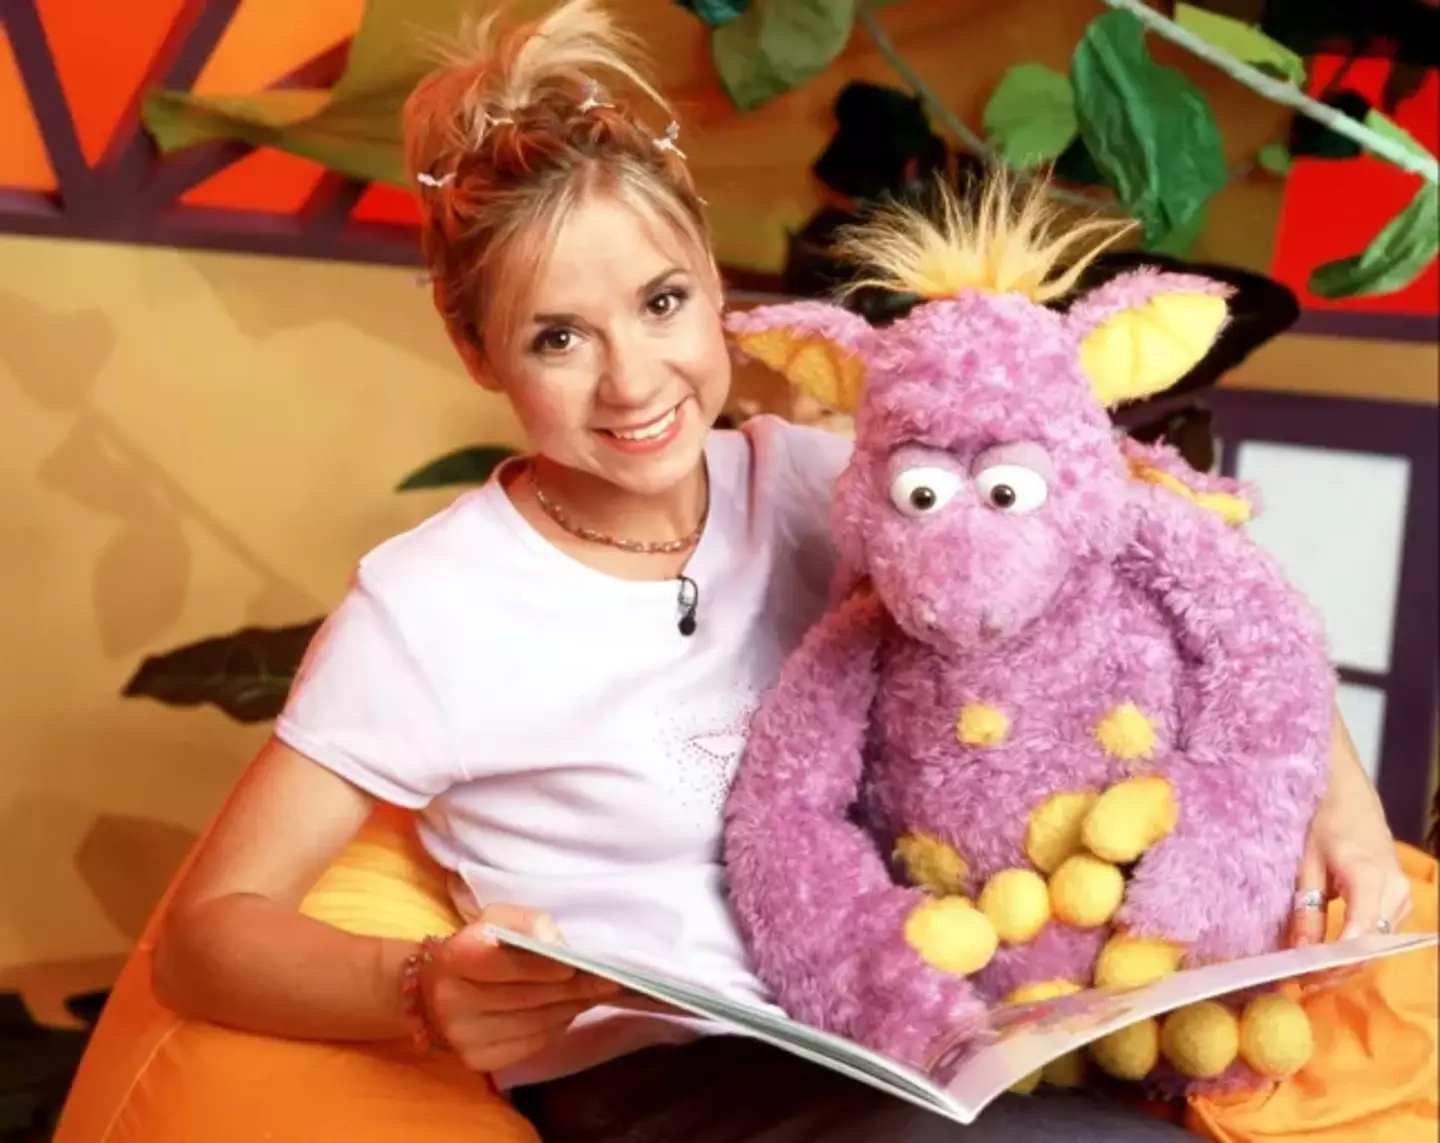 Sarah-Jane Honeywell has opened up about her 'darkest moment' after being fired from CBeebies.